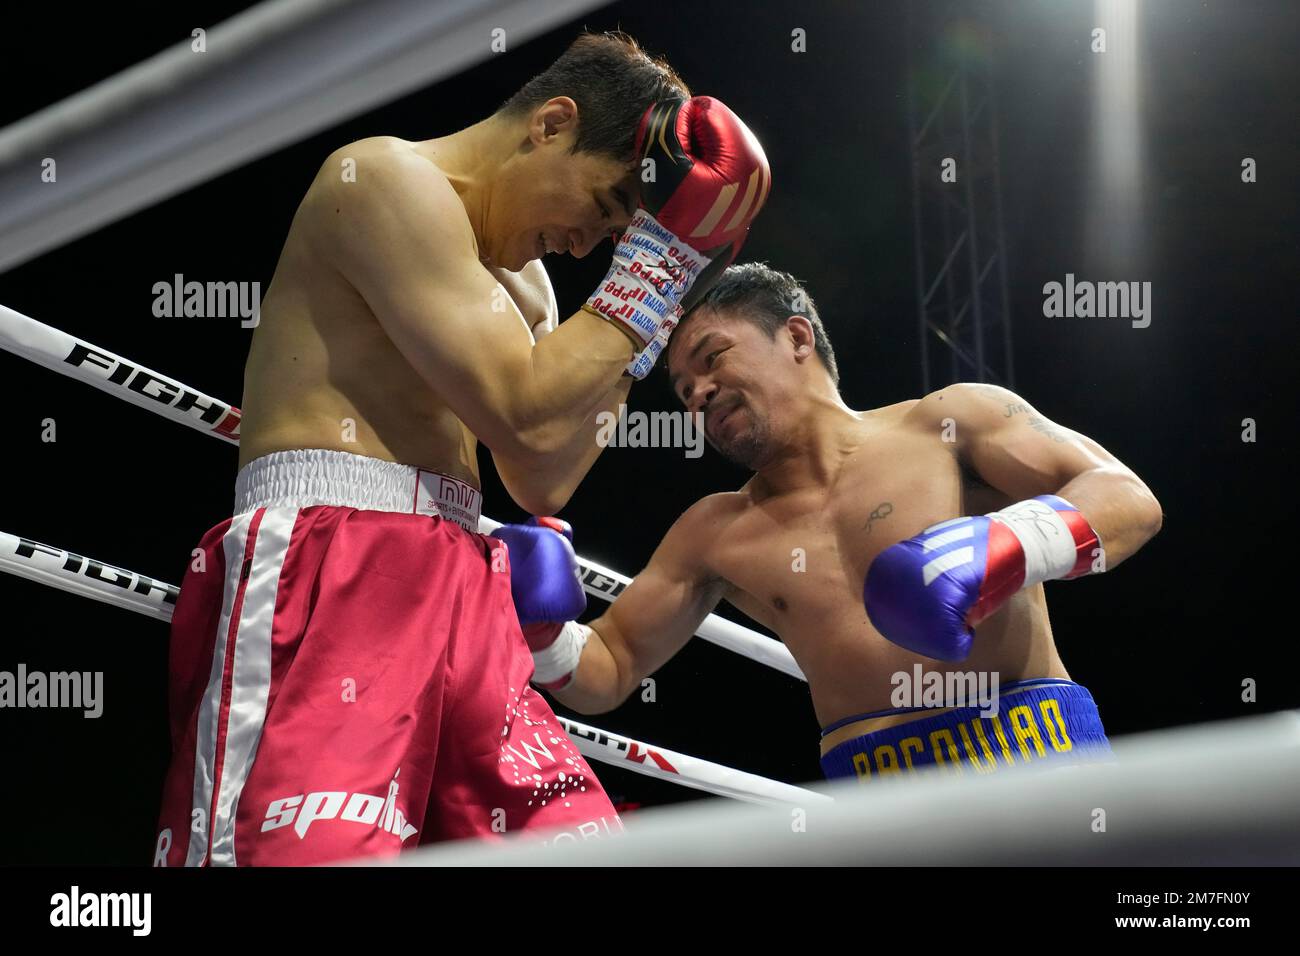 Former Filipino boxer Manny Pacquiao, right, lands his punch to South Korean martial artist D.K